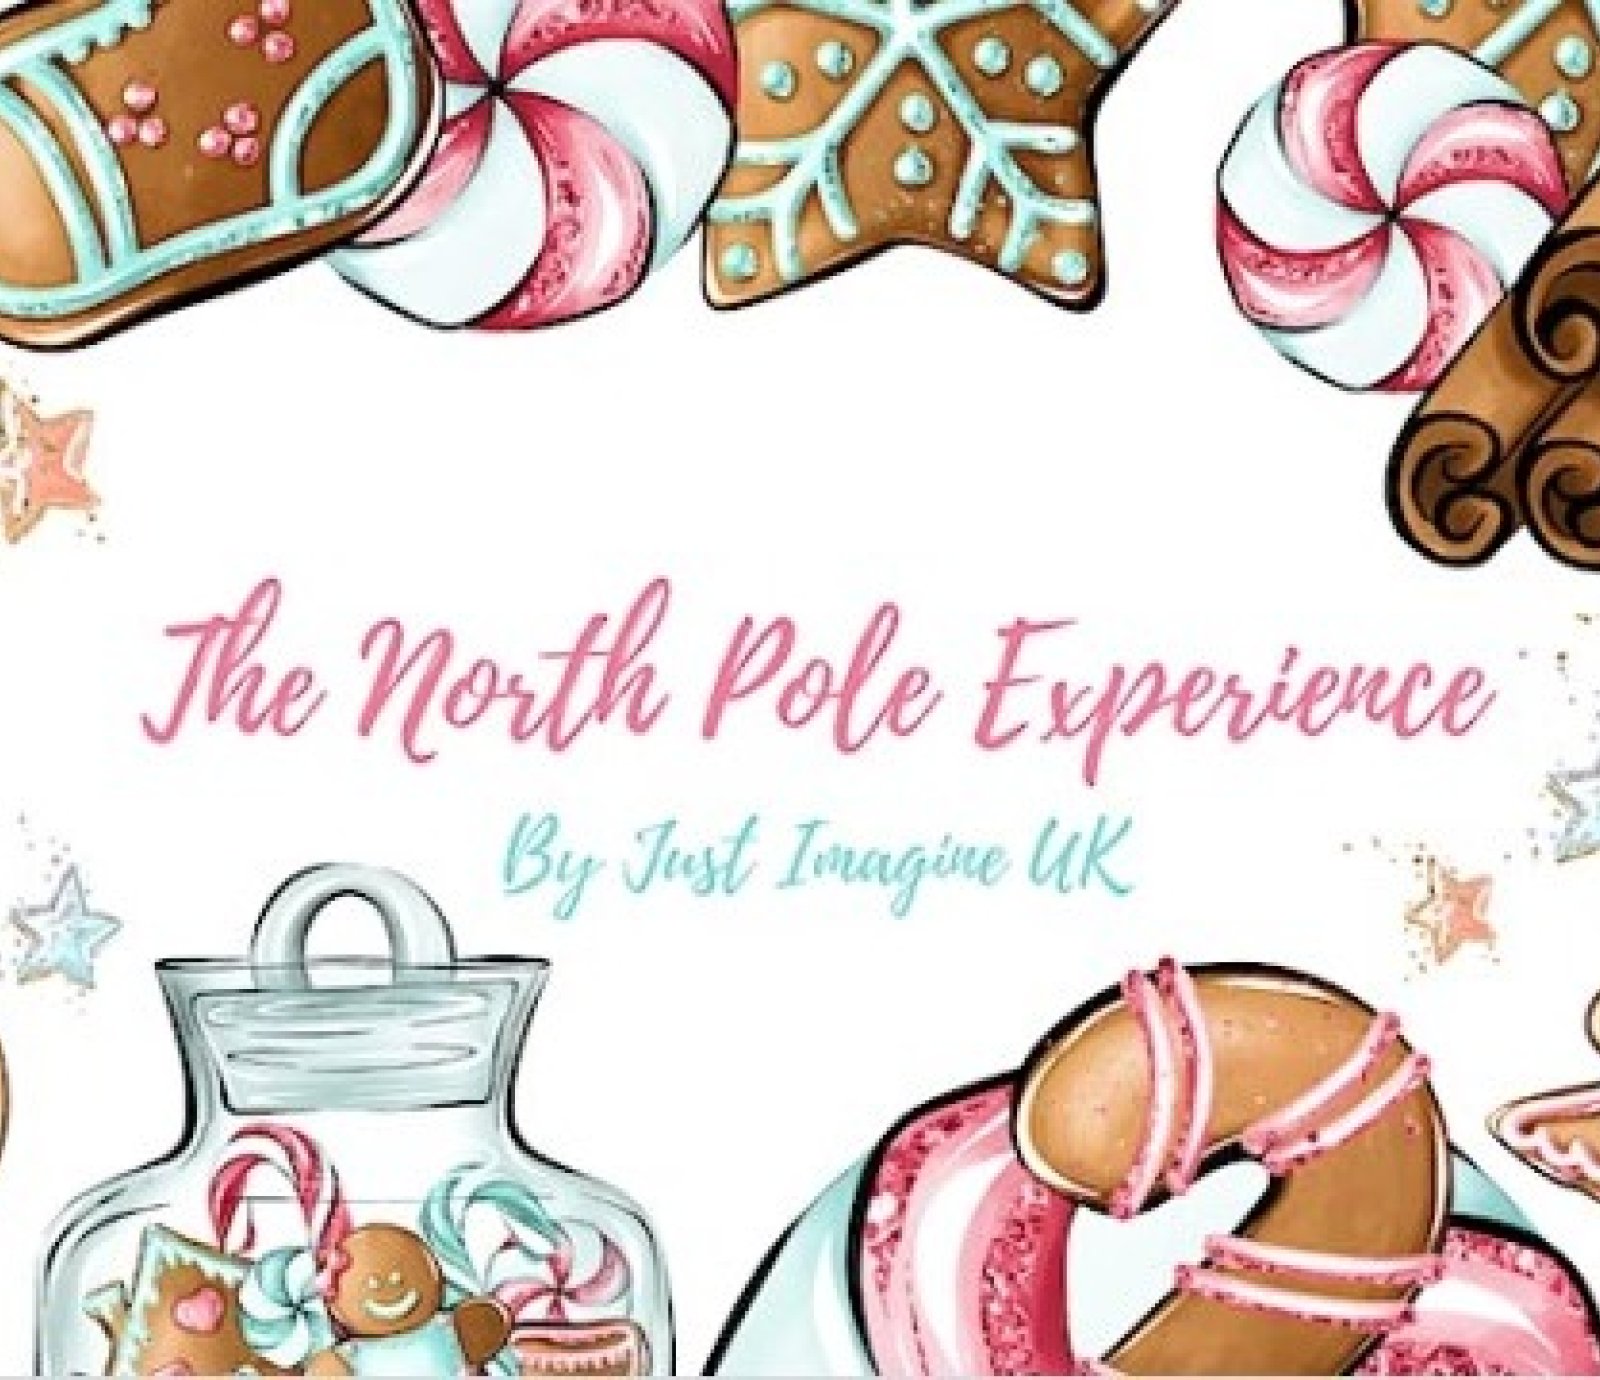 The North Pole Experience